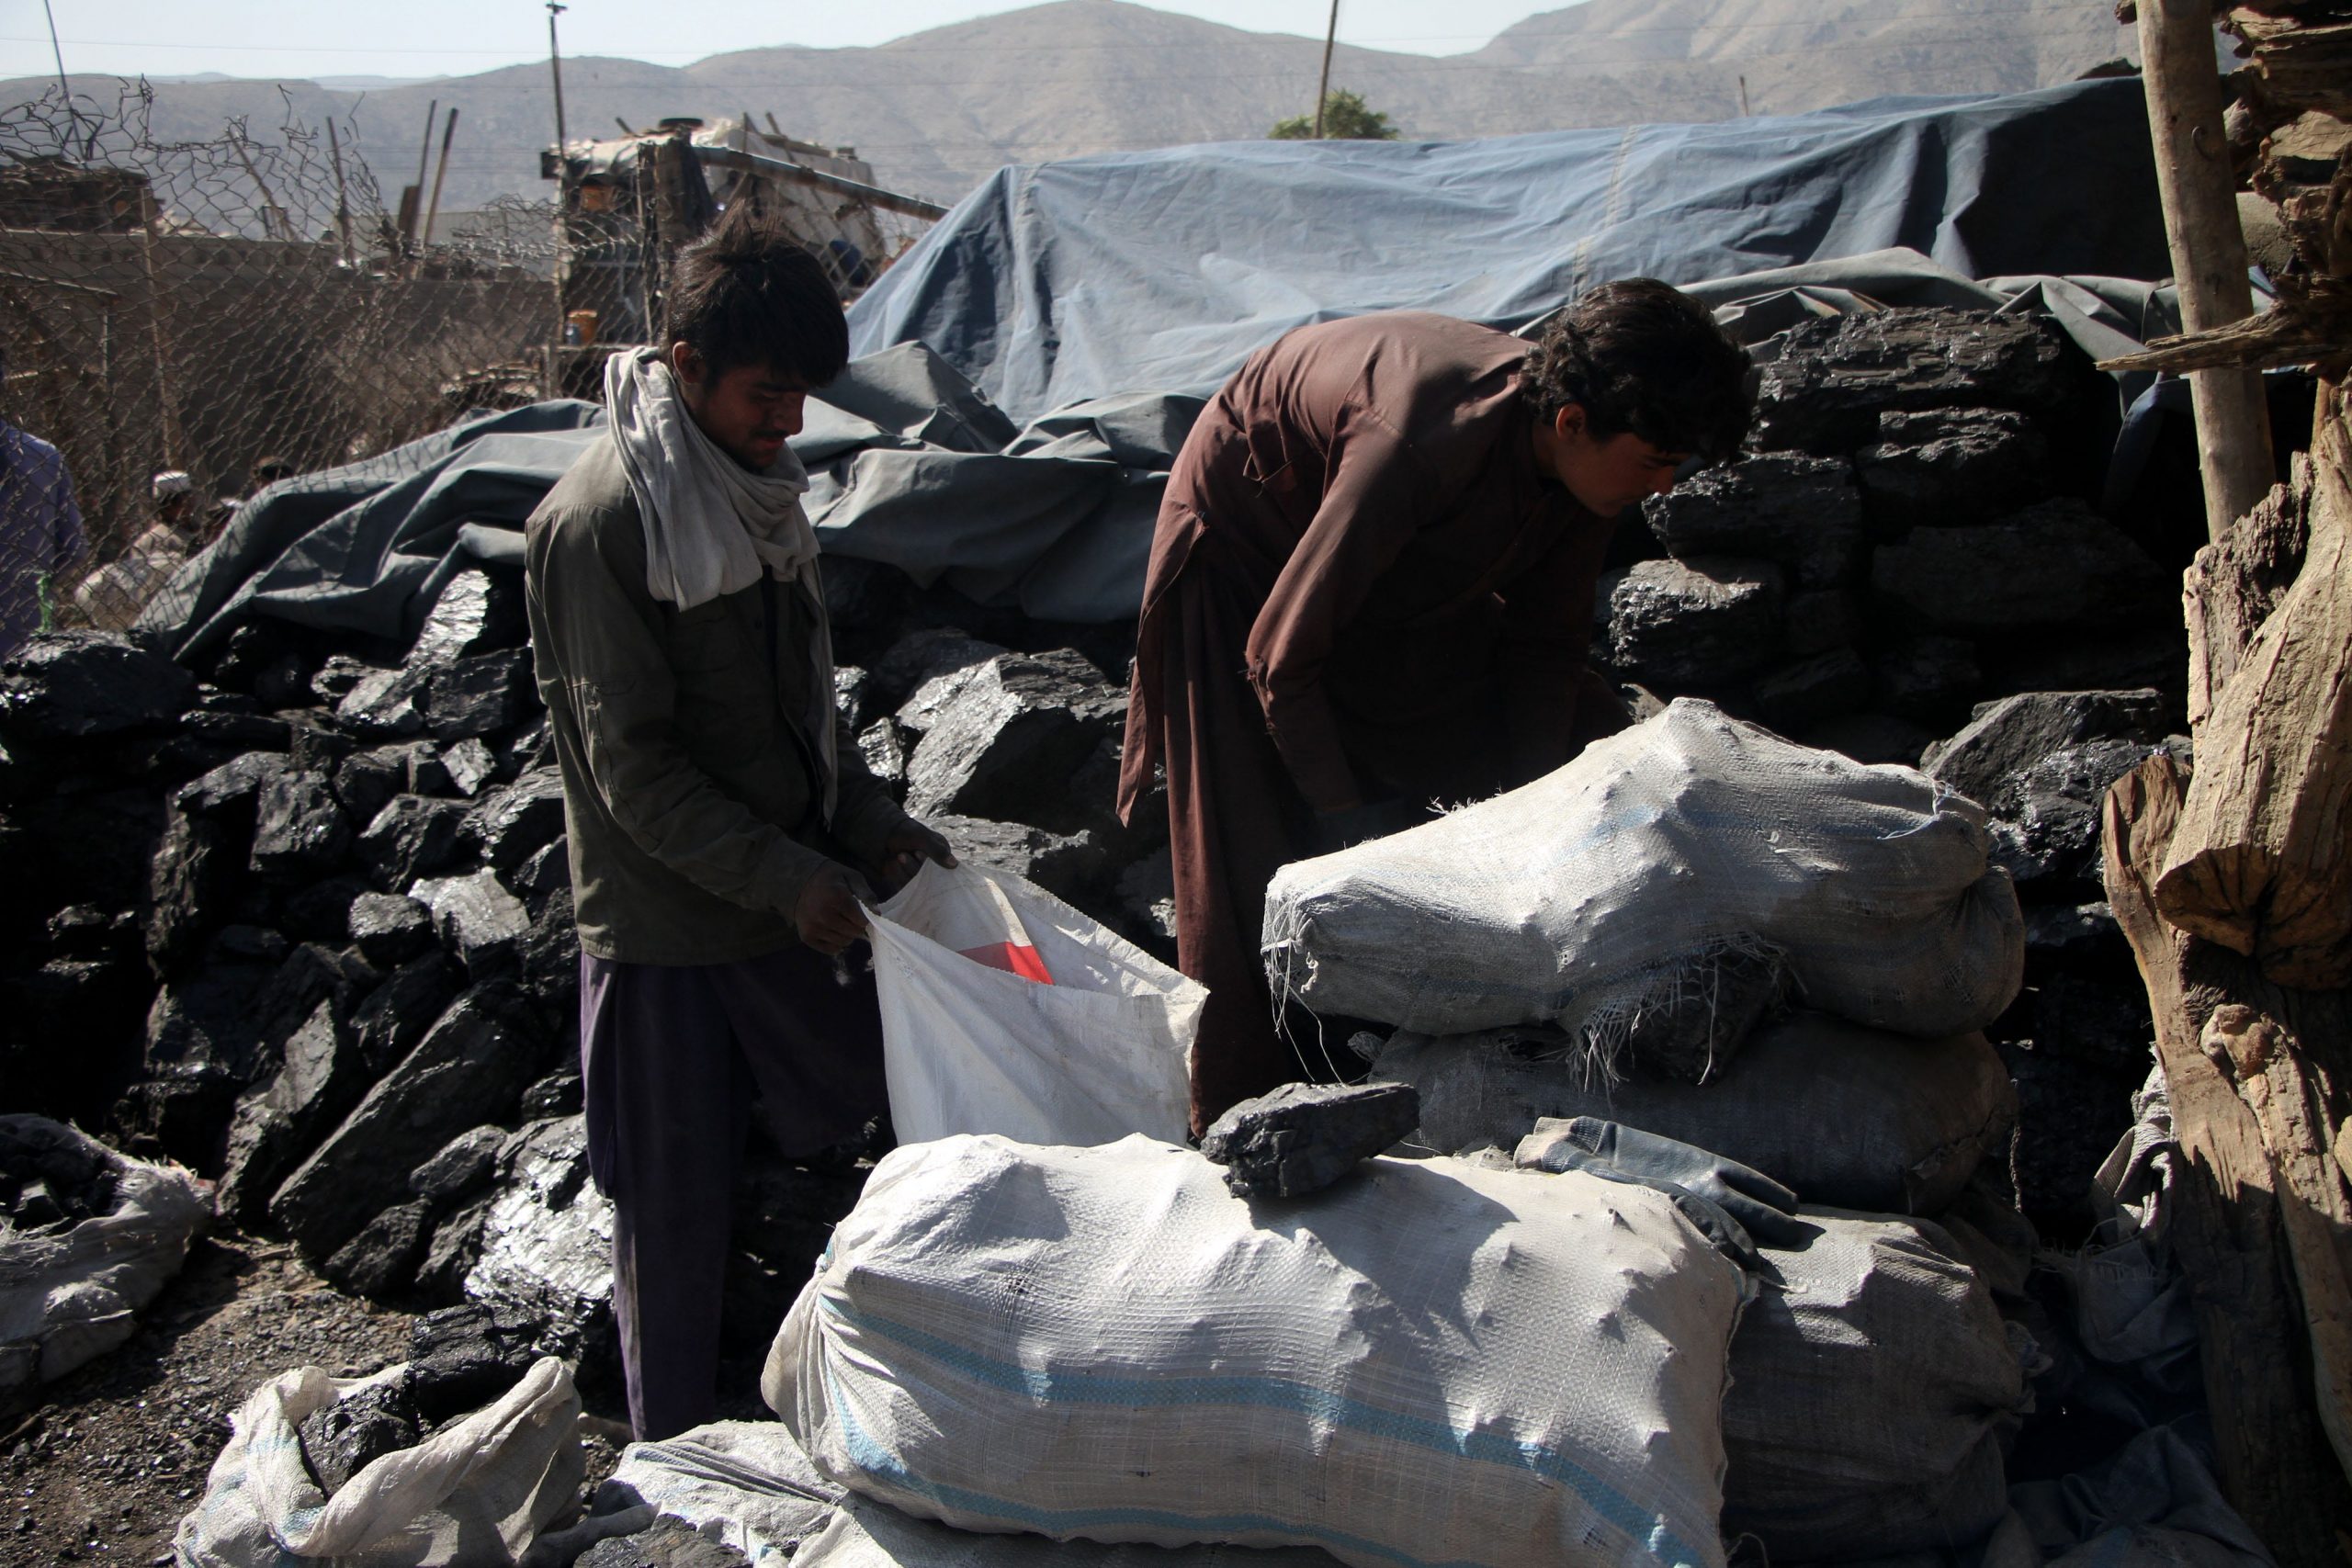 Two men are seen working amid piles of coal.